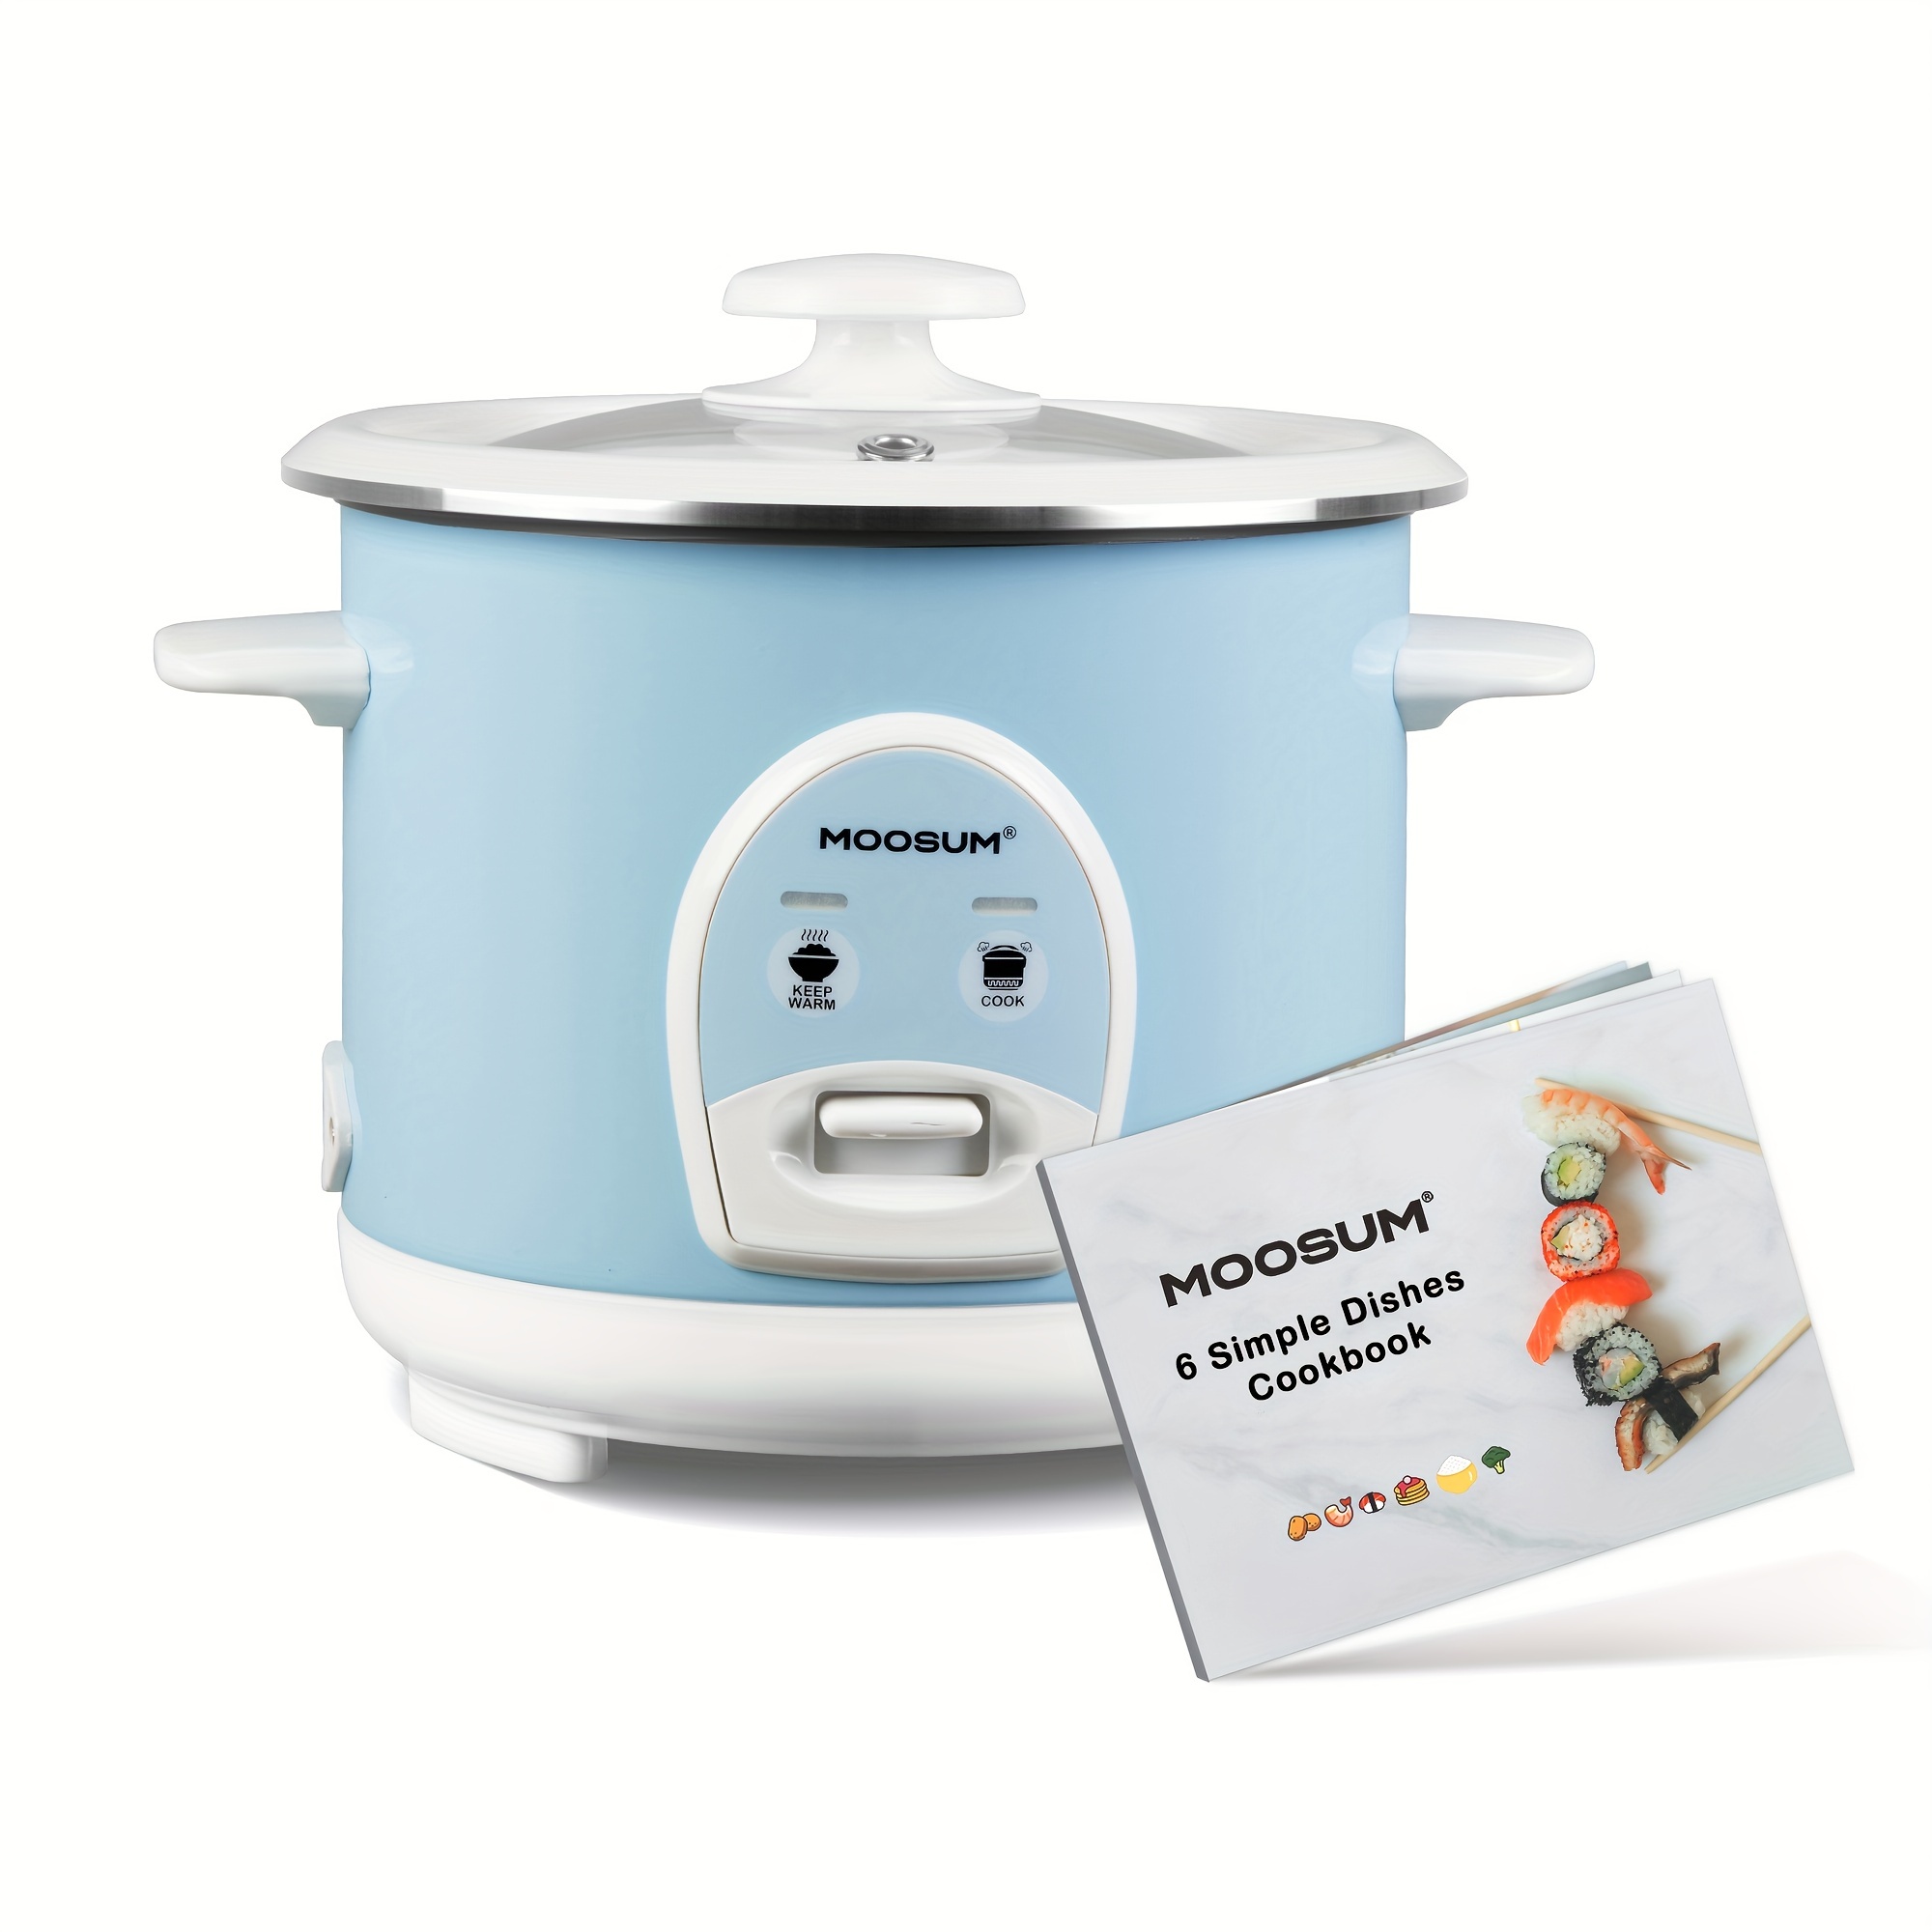 BEAR Rice Cooker 2 Cups Uncooked(4Cups Cooked), Small Rice Cooker Steamer  with R